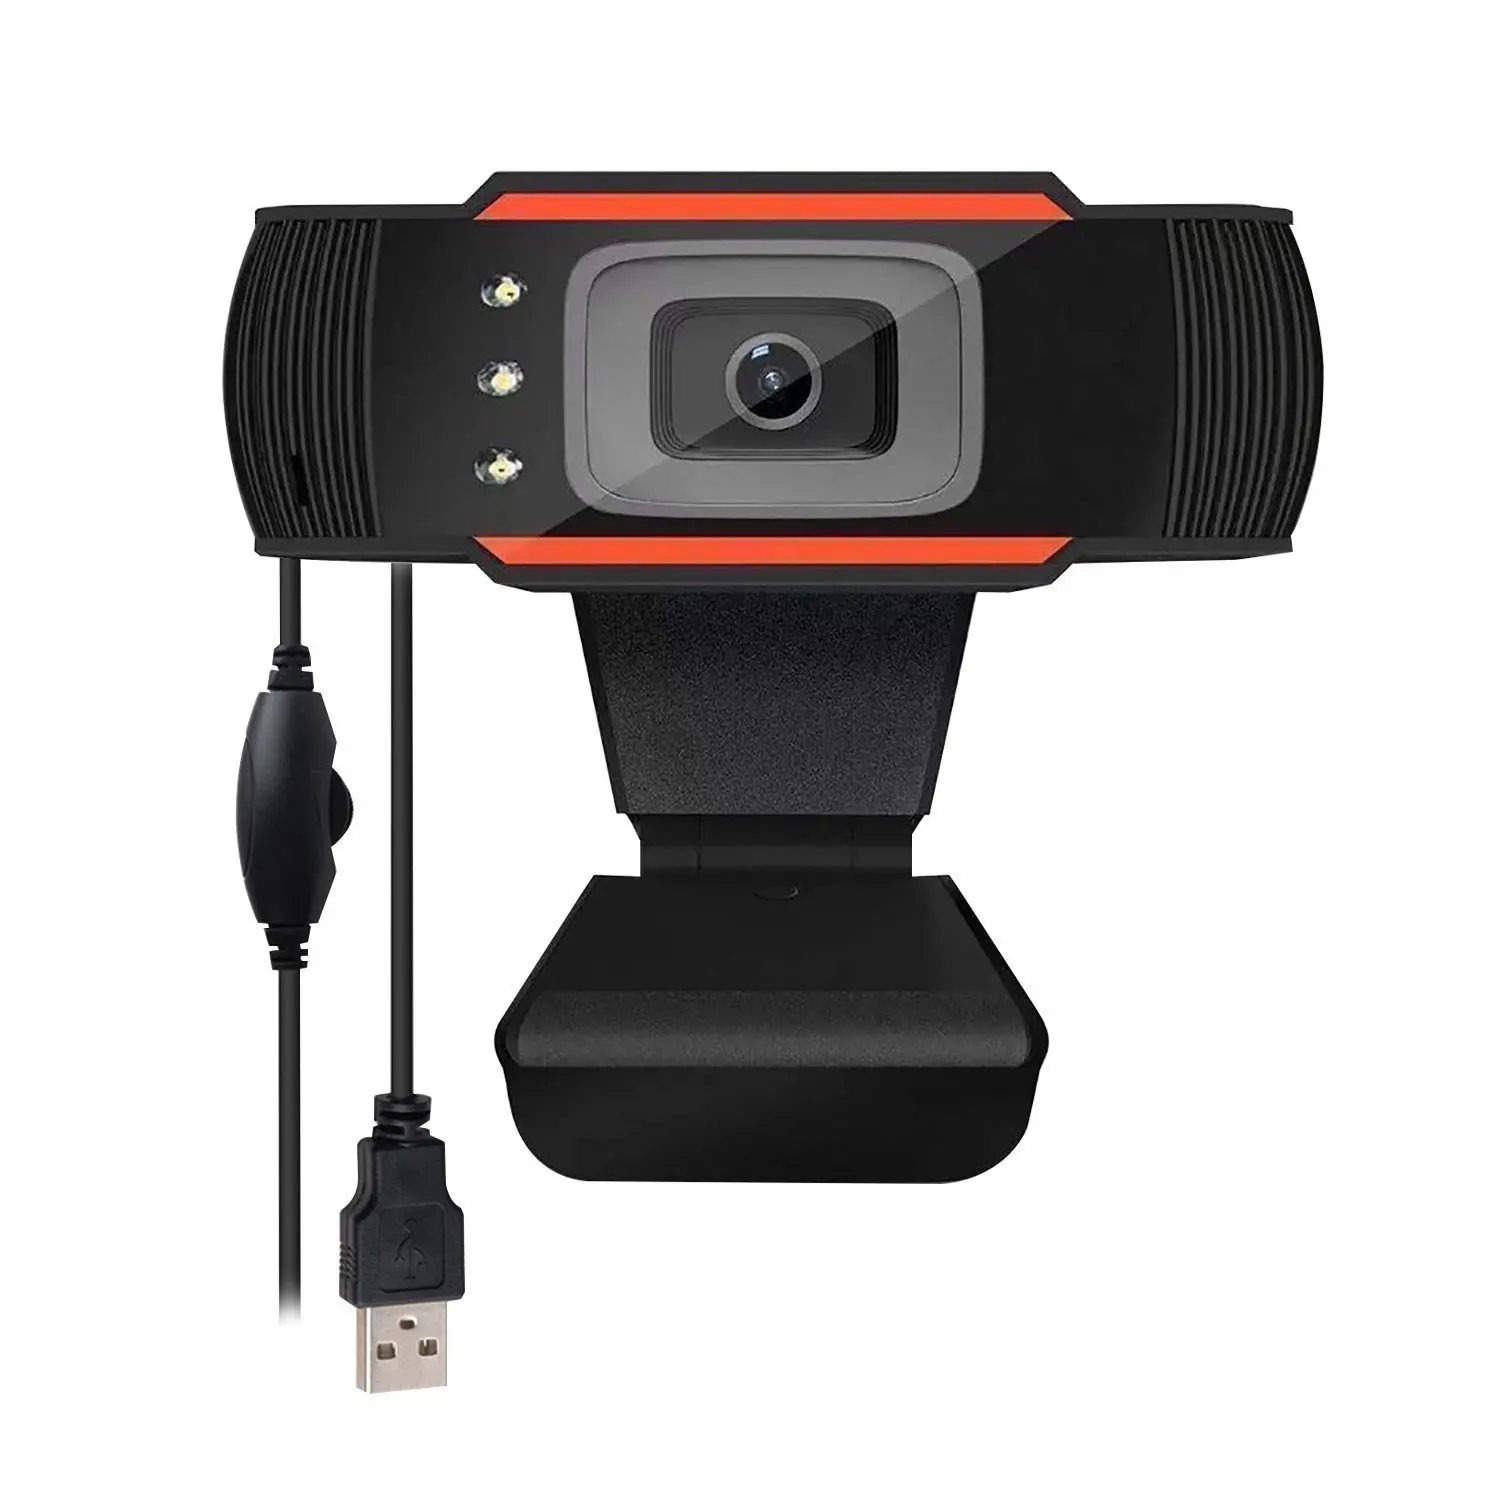 2MP full hd high definition 1080P webcam Mini Fixed Focus web camera for online learning and live streaming